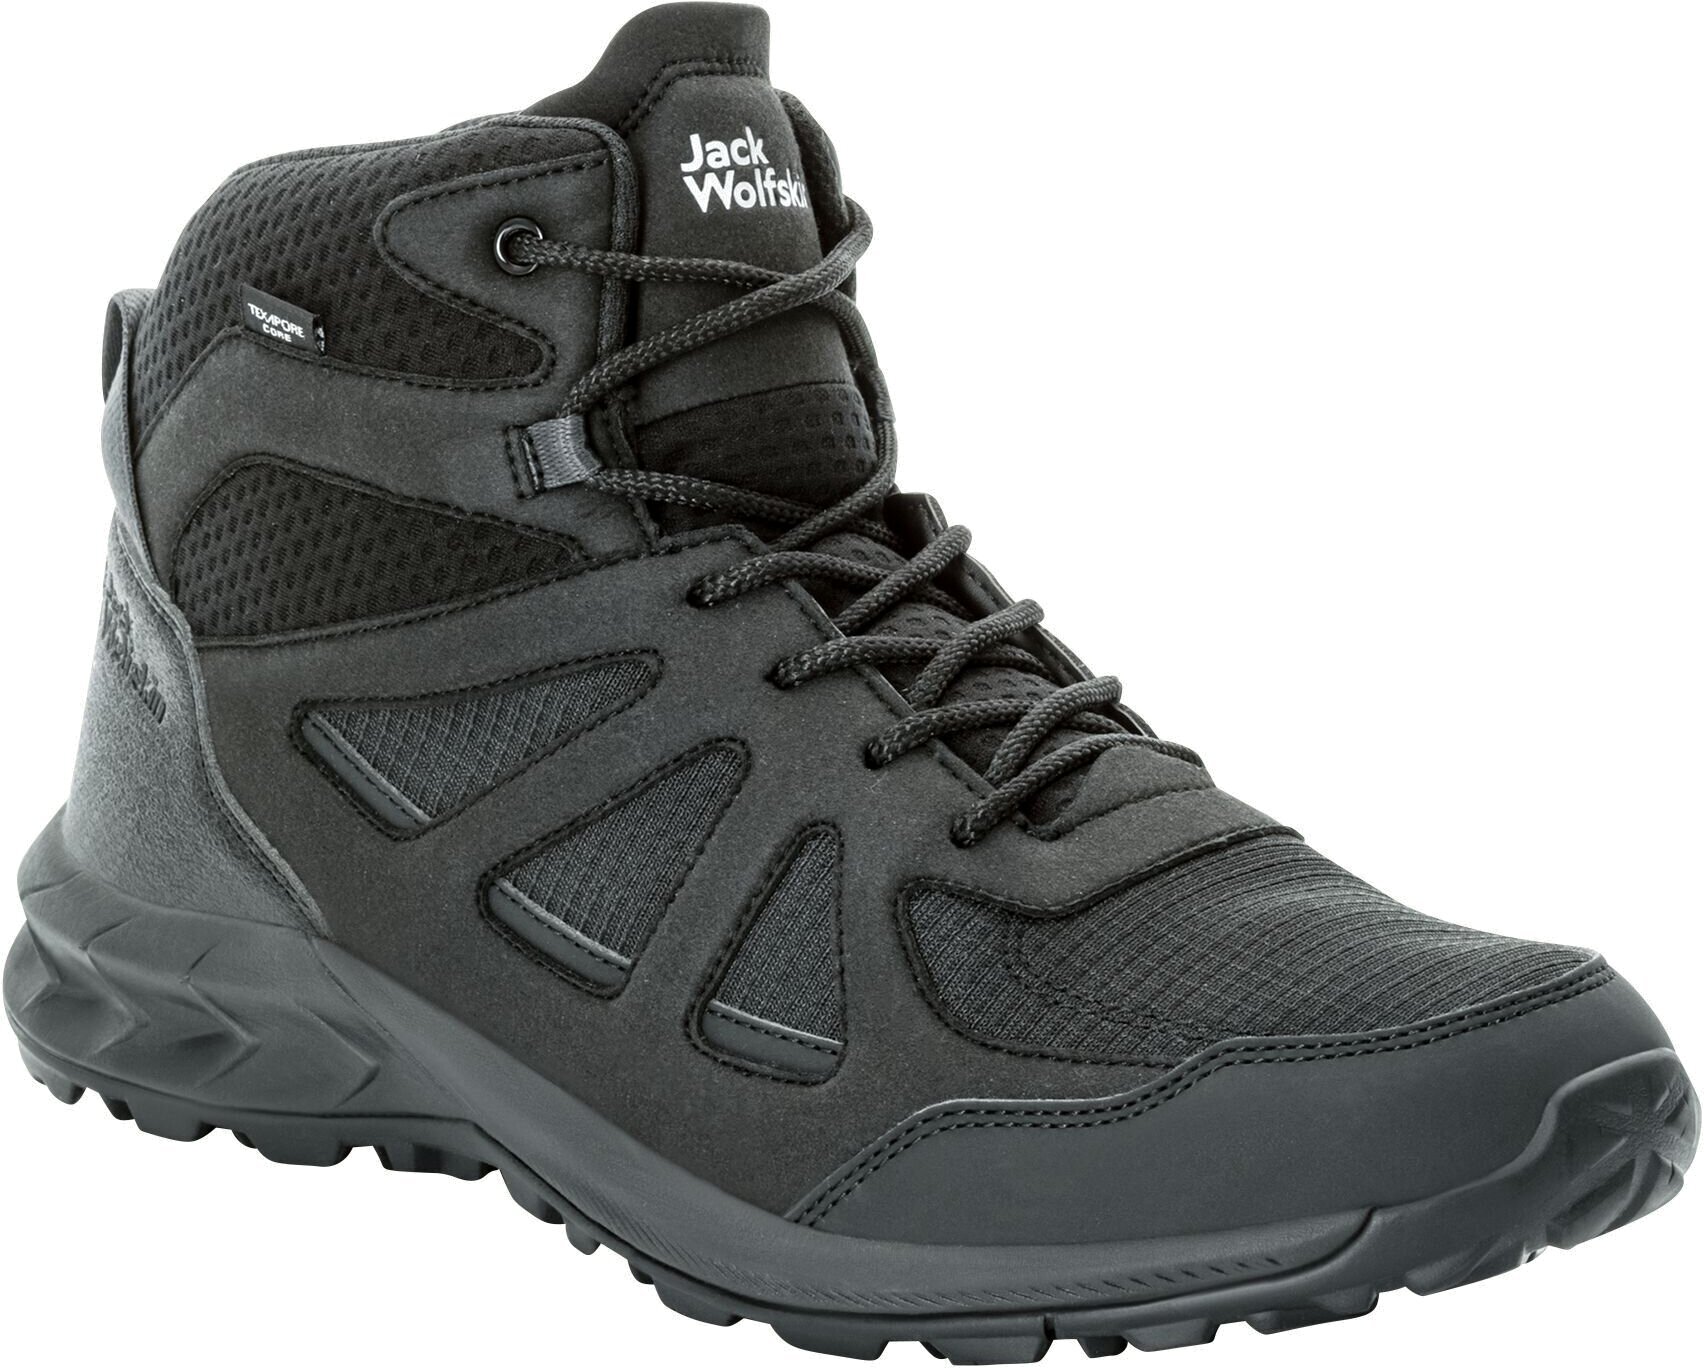 Mens Outdoor Shoes Jack Wolfskin Woodland 2 Texapore Mid M Black 45 Mens Outdoor Shoes